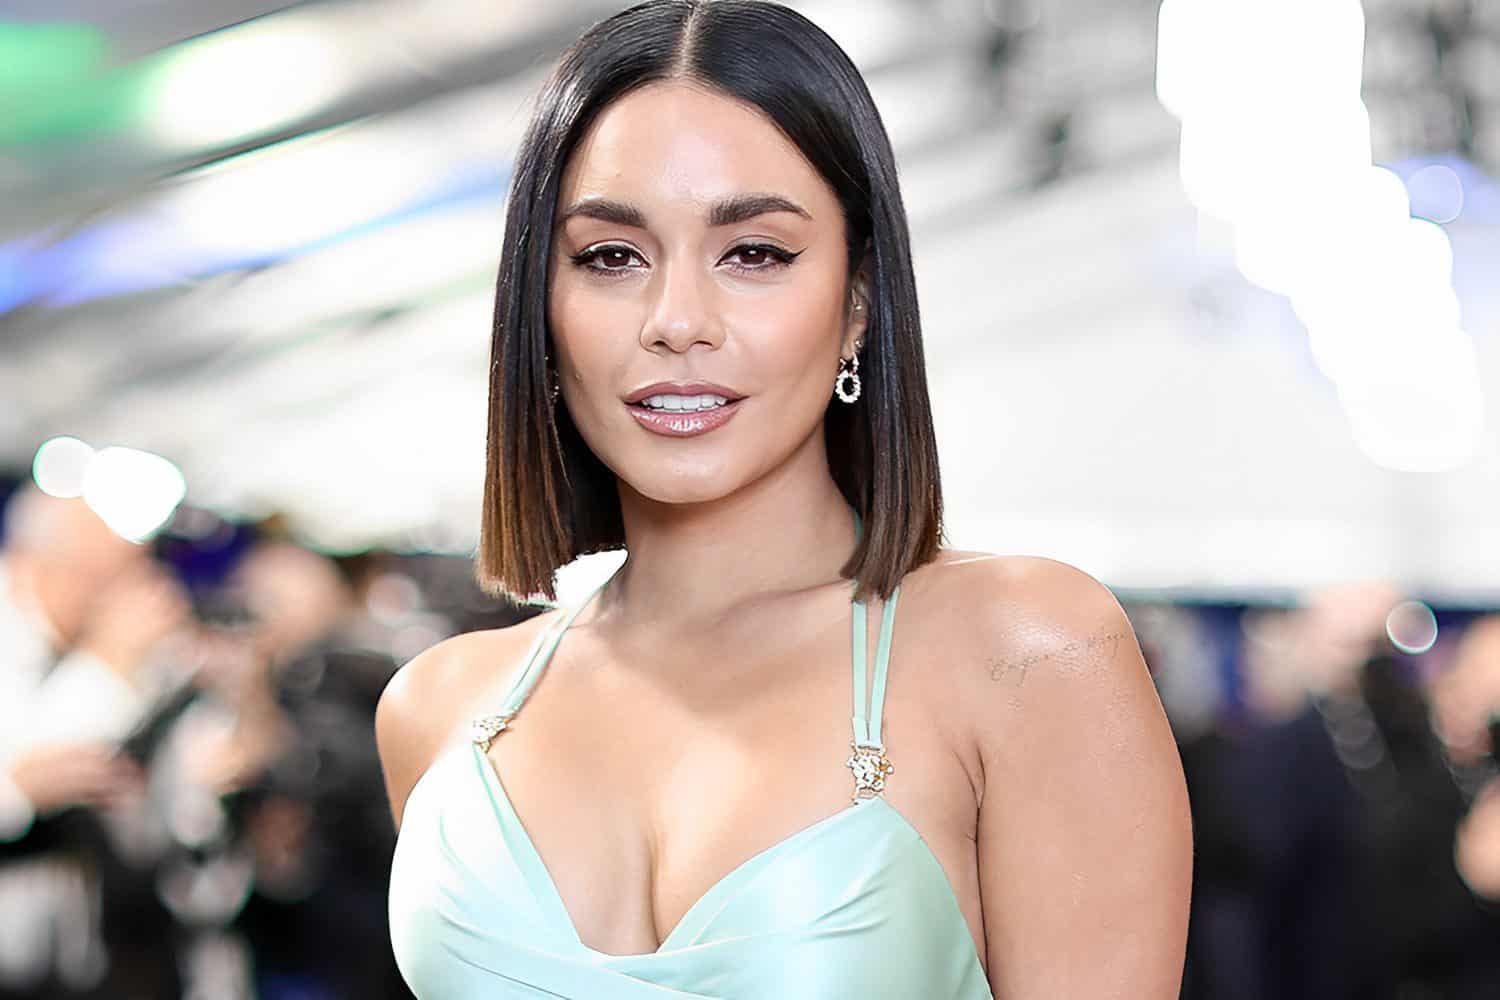 Every Man Vanessa Hudgens Has Dated Since Zac Efron Up Until Now